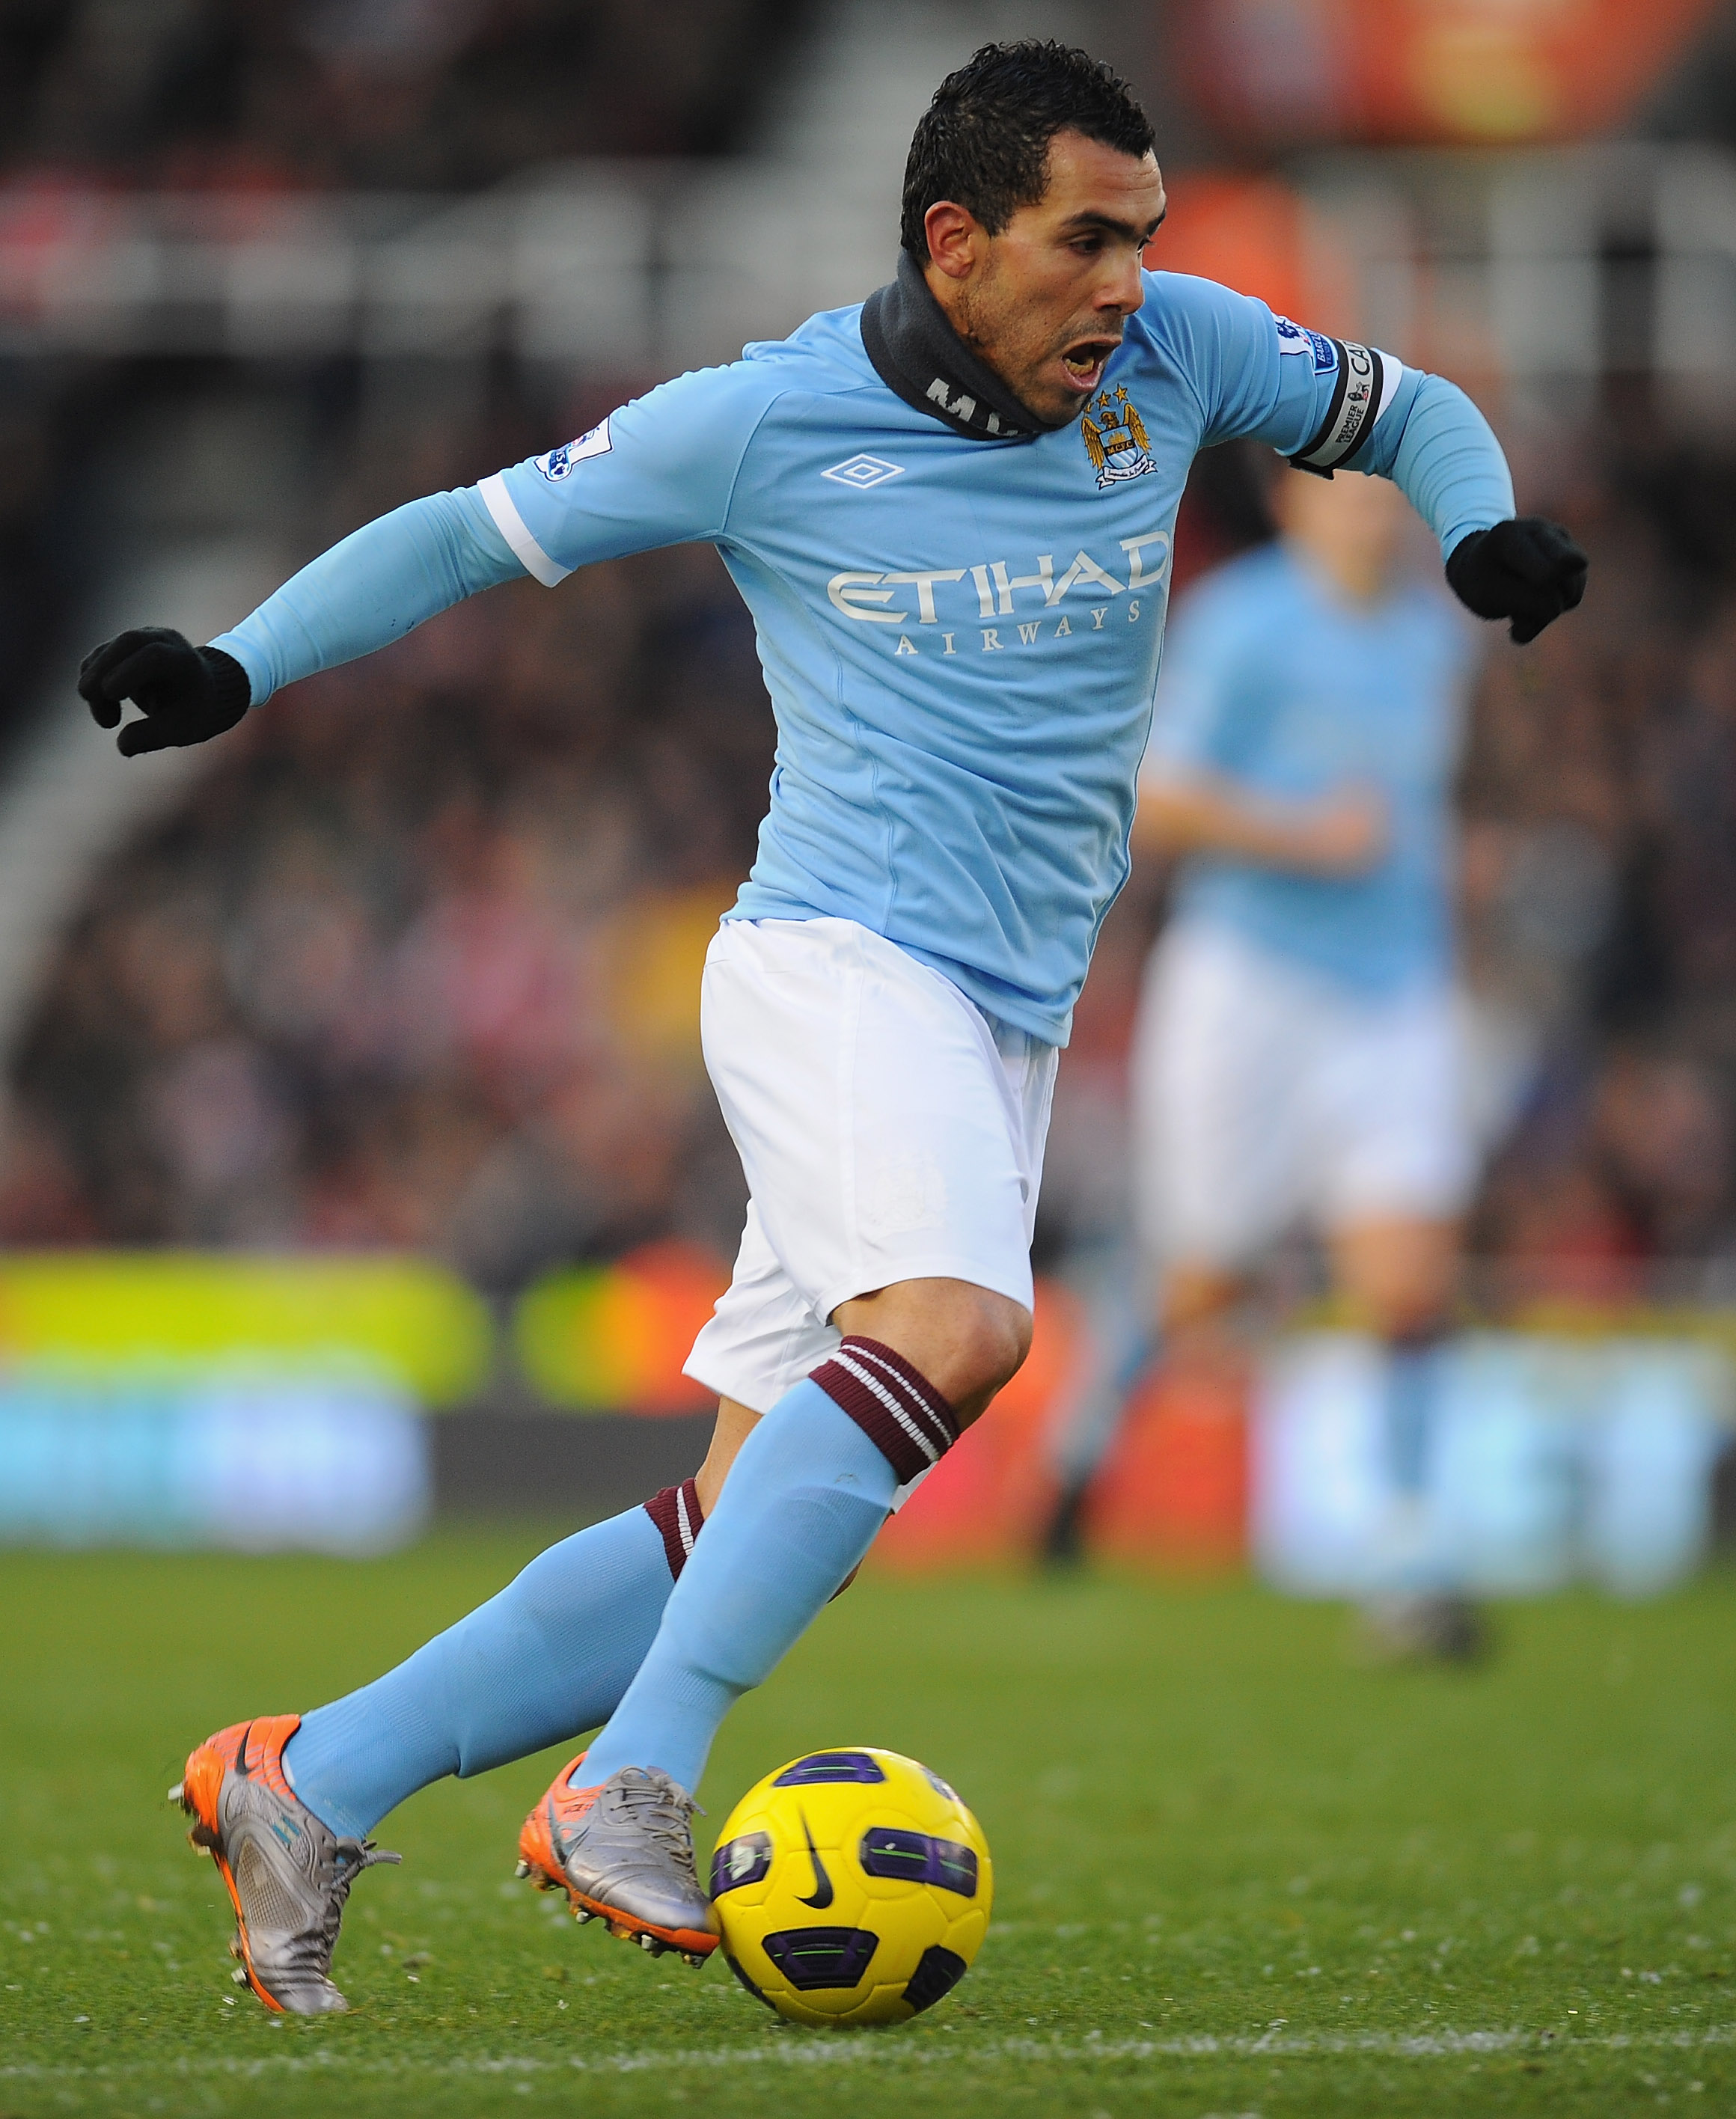 STOKE ON TRENT, ENGLAND - NOVEMBER 27:  Carlos Tevez of Manchester City in action during the Barclays Premier League match between Stoke City and Manchester City at Britannia Stadium on November 27, 2010 in Stoke on Trent, England.  (Photo by Clive Mason/